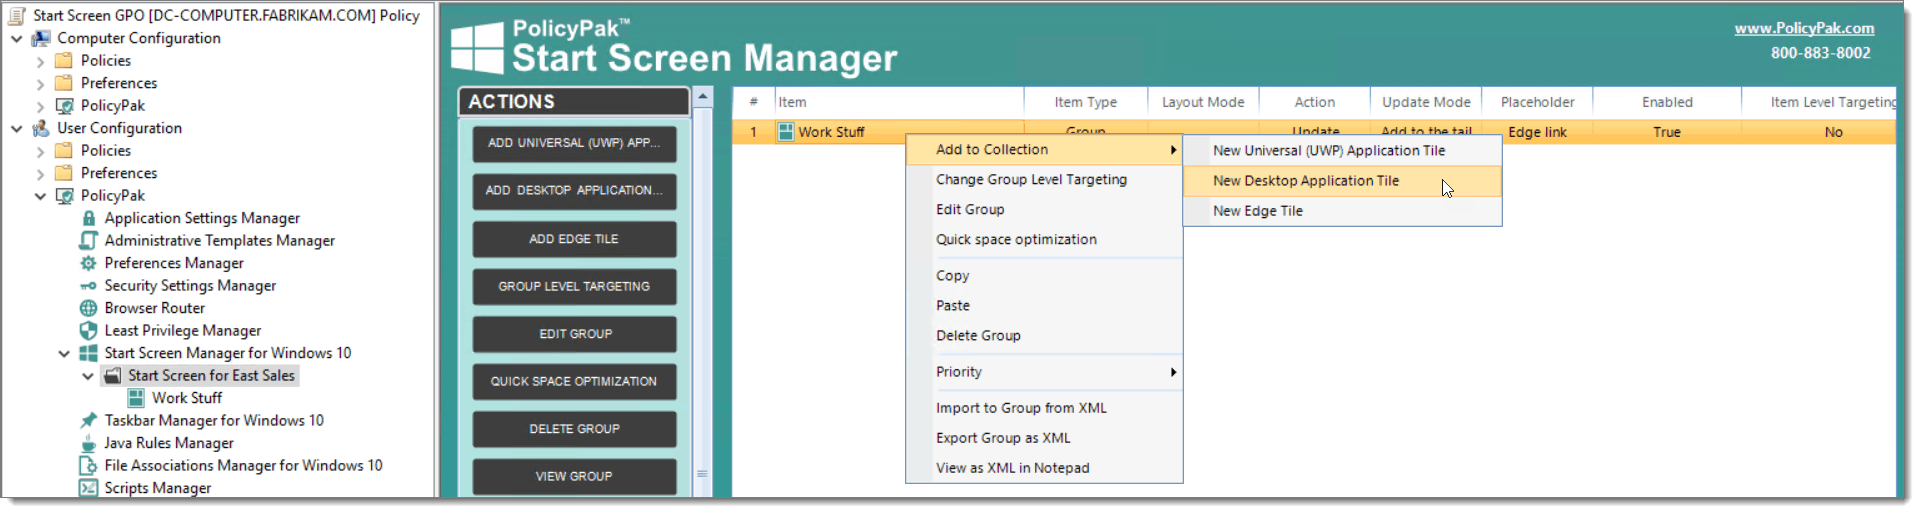 Adding a New Desktop Application Tile with PolicyPak Start Screen Manager